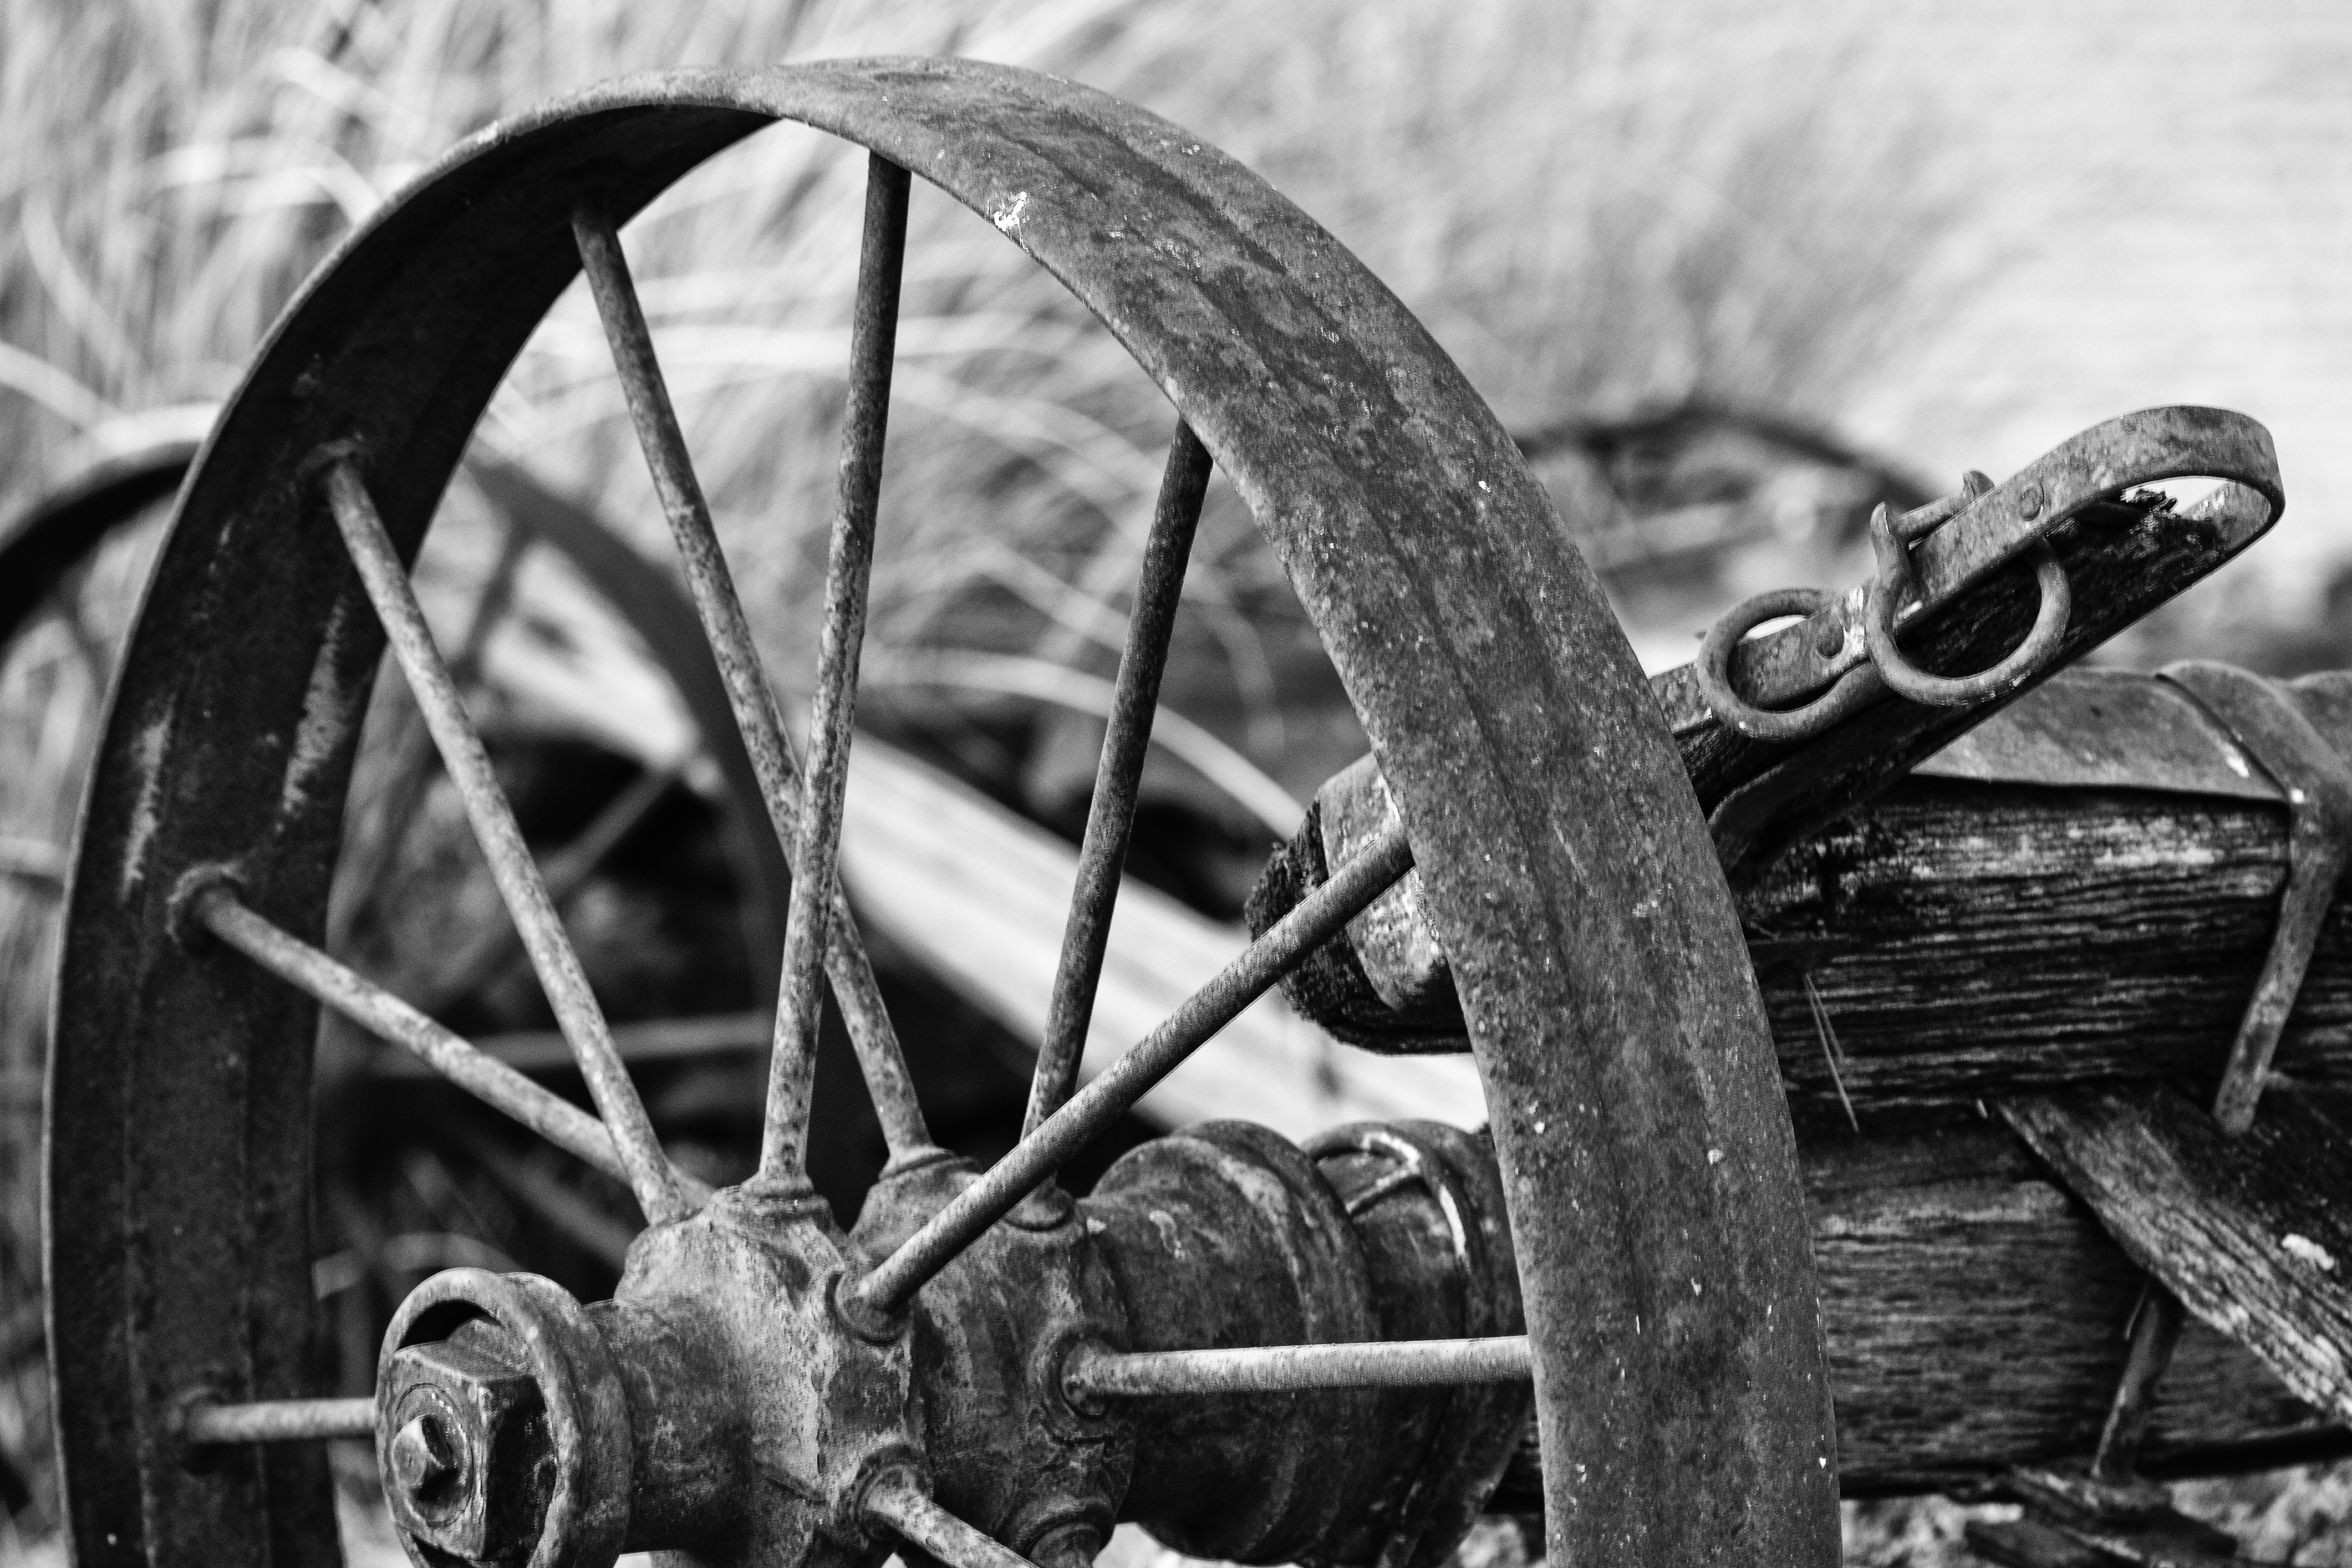 Rusted Wheel Grayscale Photo, Abandoned, Black and white, Close -up, Daytime, HQ Photo